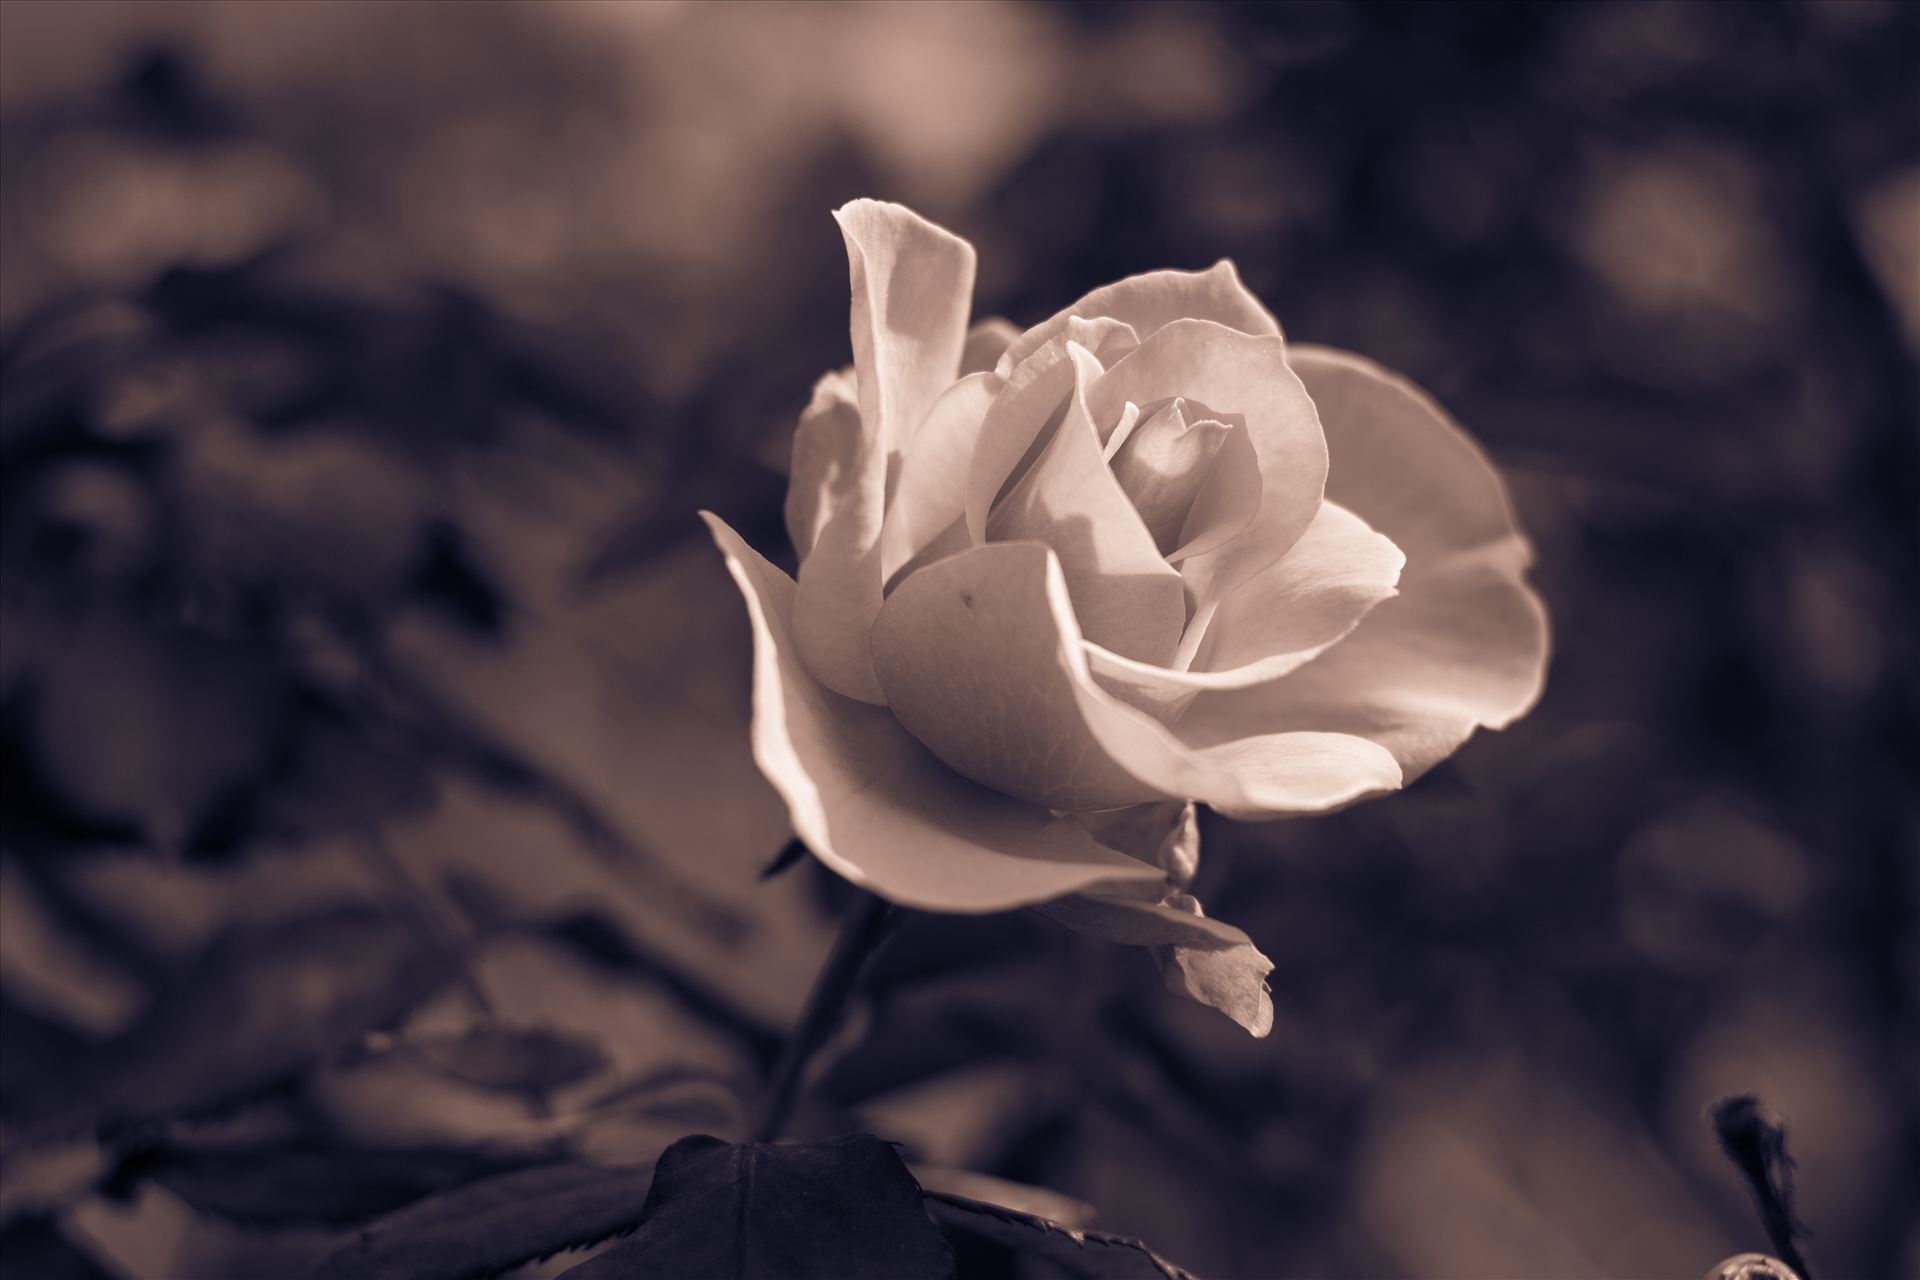 By Any Other Name 10272015.jpg - Beautiful rose in monotone color on Central Coast of California by Sarah Williams